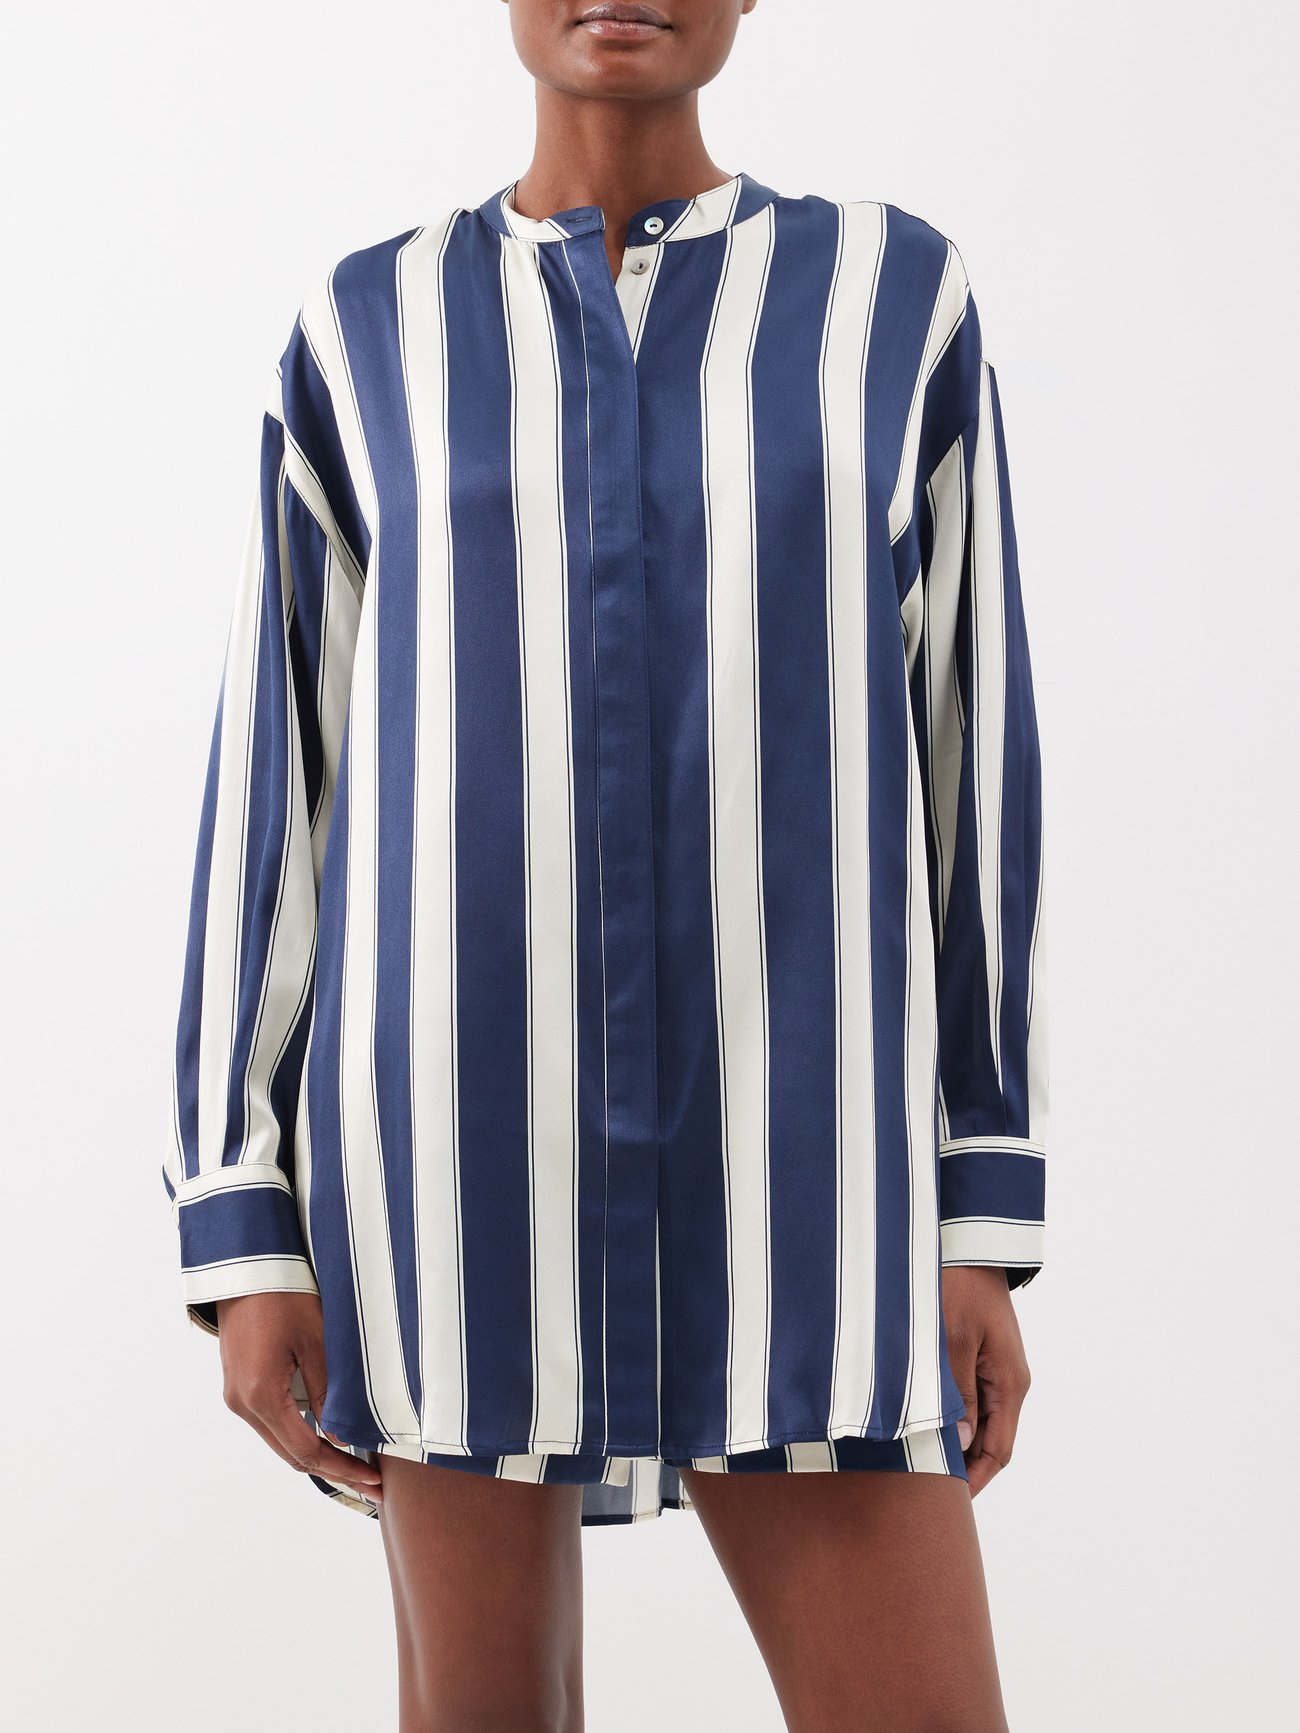 Asceno silk striped pyjamas in blue and white. button up oversized silk shirt and boxers set. 100% silk, Concealed button placket, Centre box pleat. 